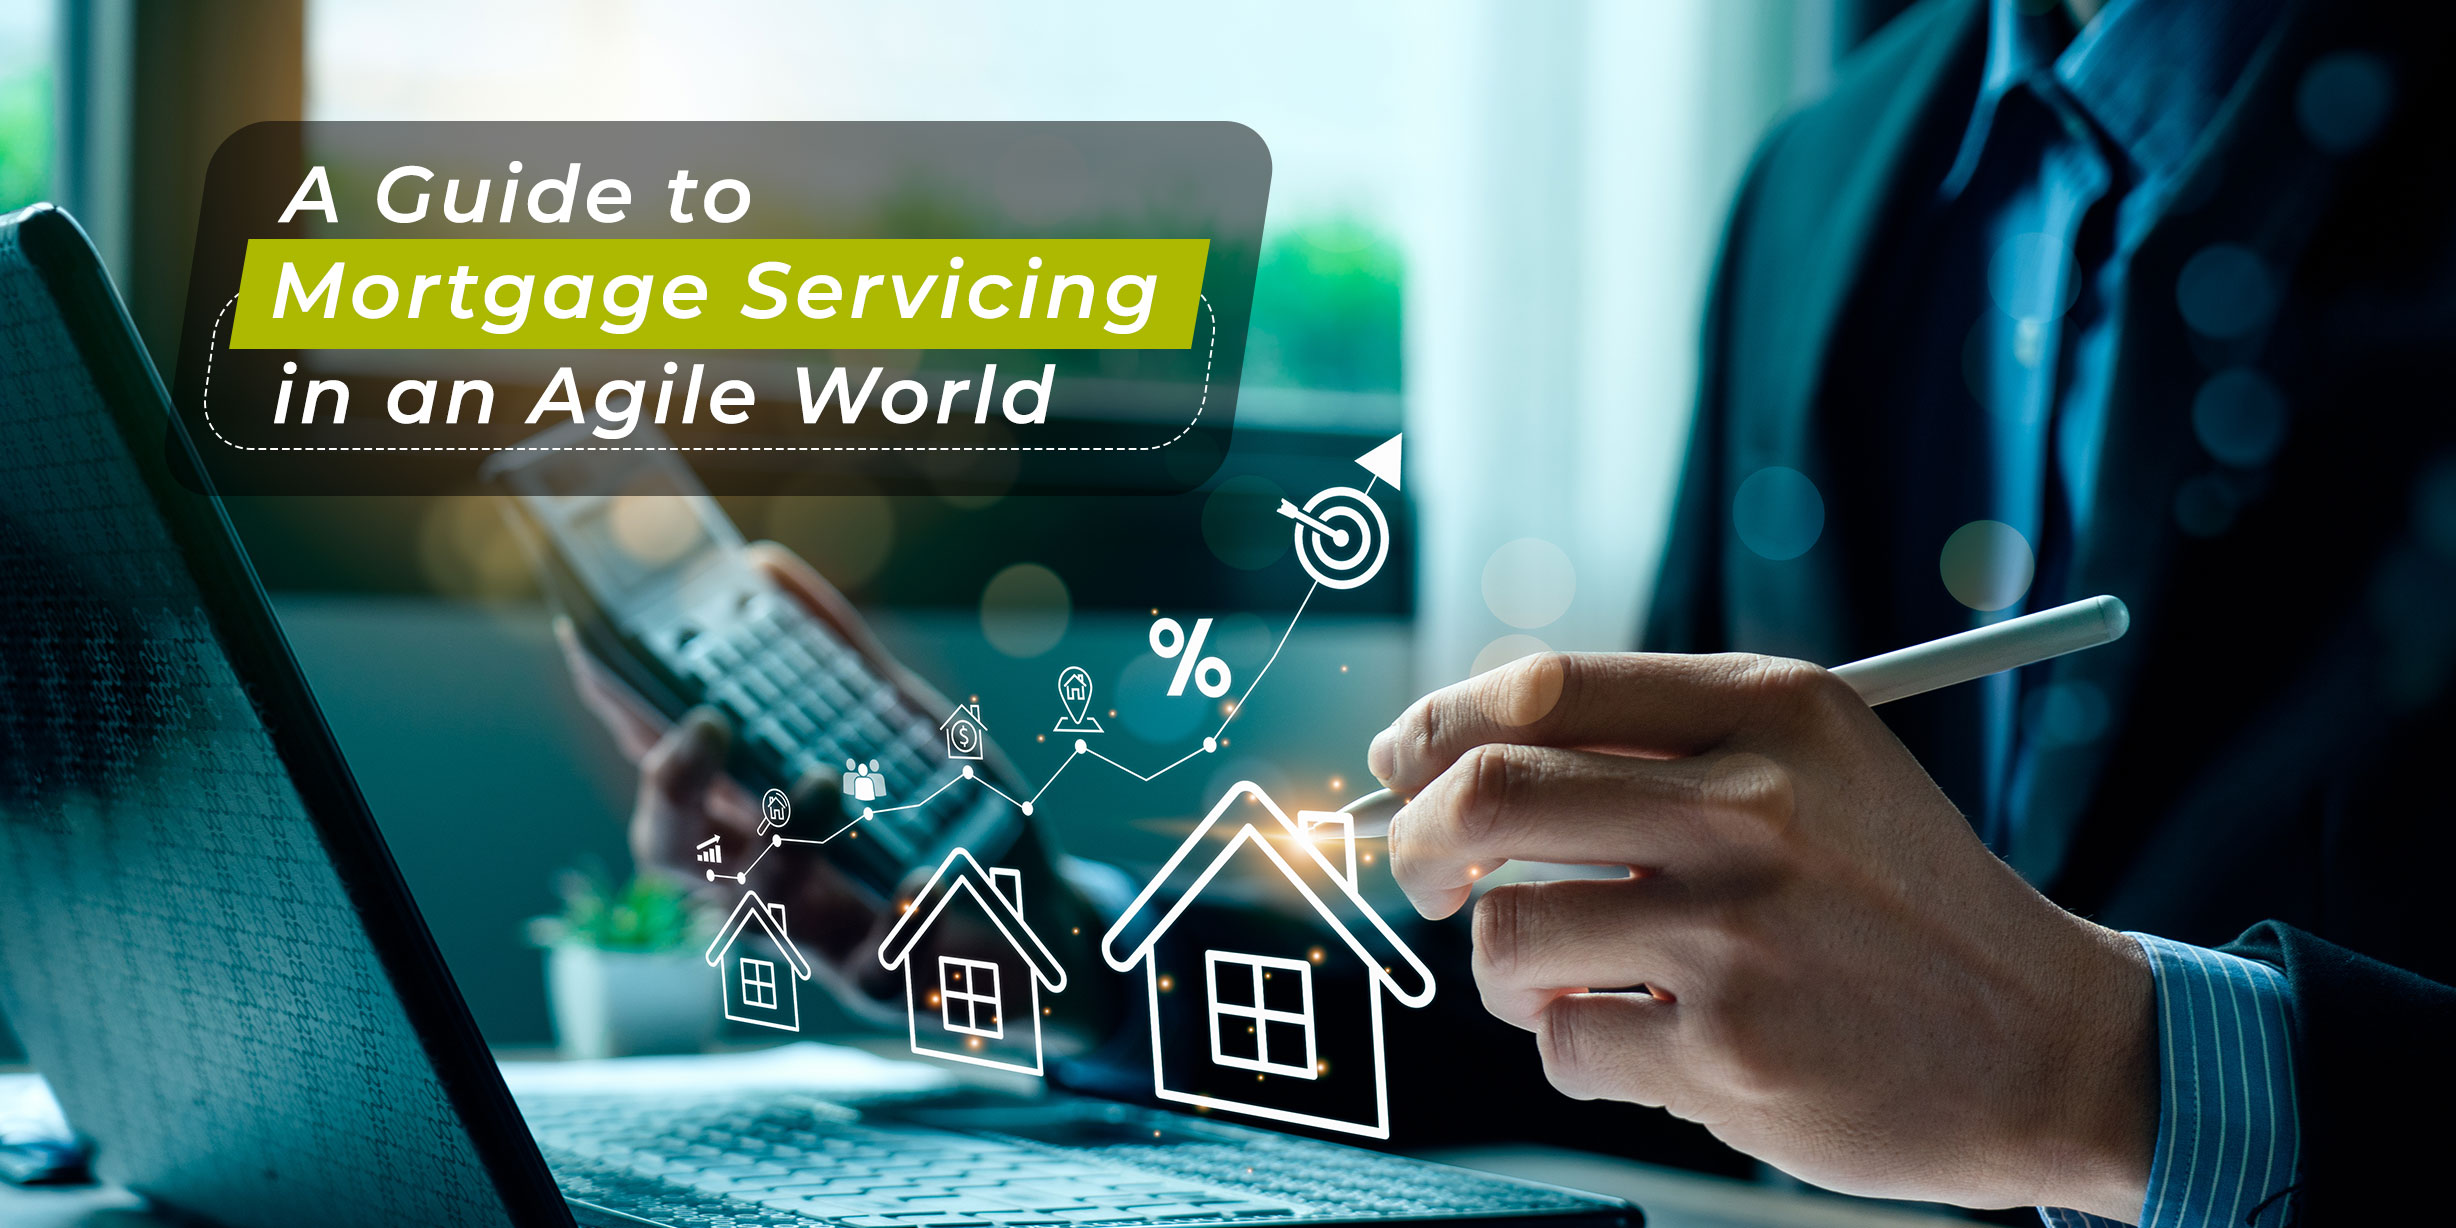 A Guide to Mortgage Servicing in an Agile World